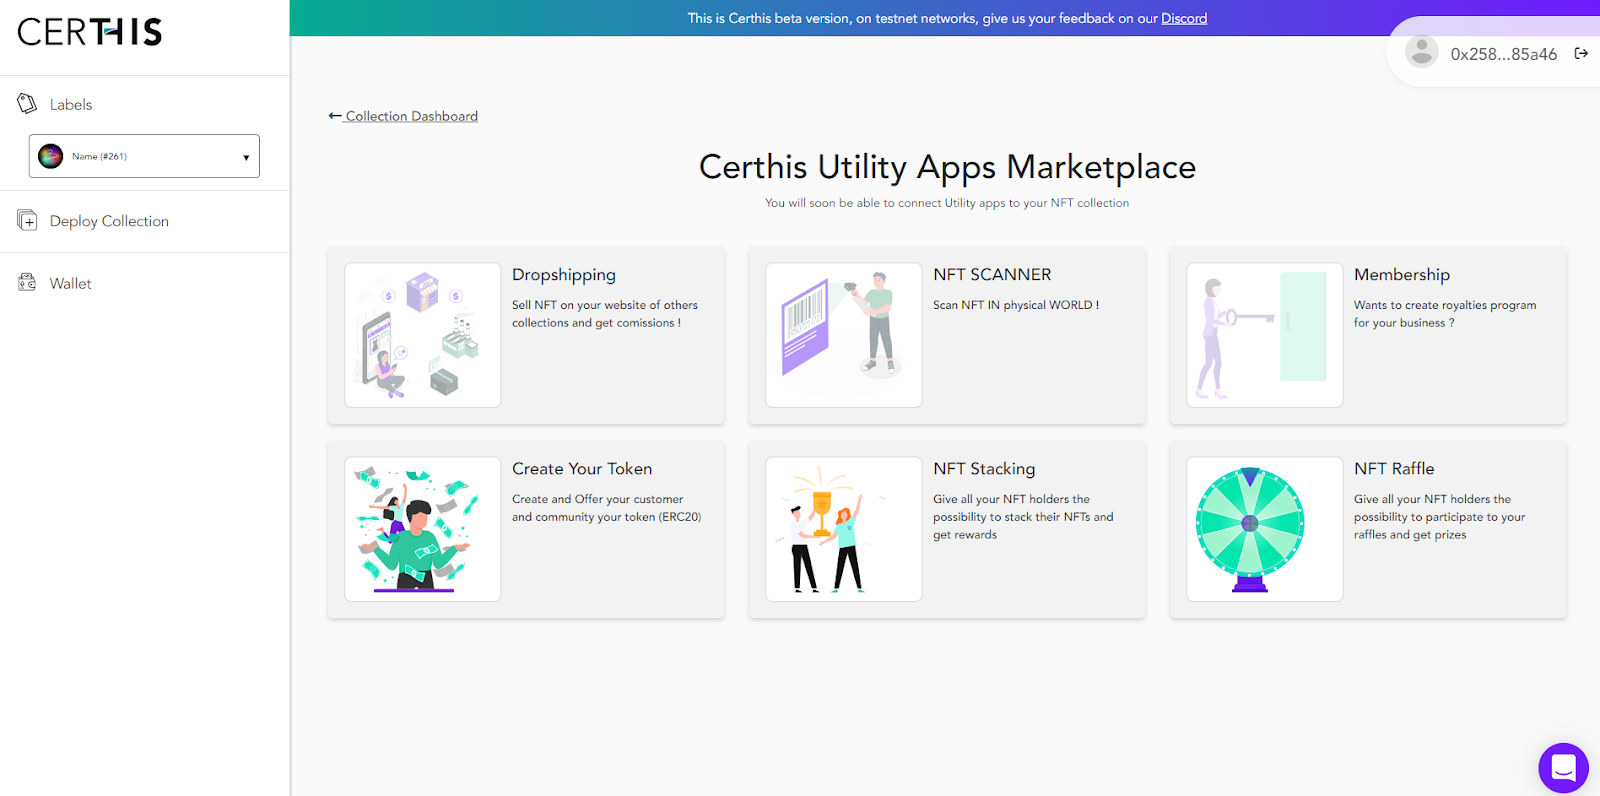 Certhis Utility Apps Marketplace